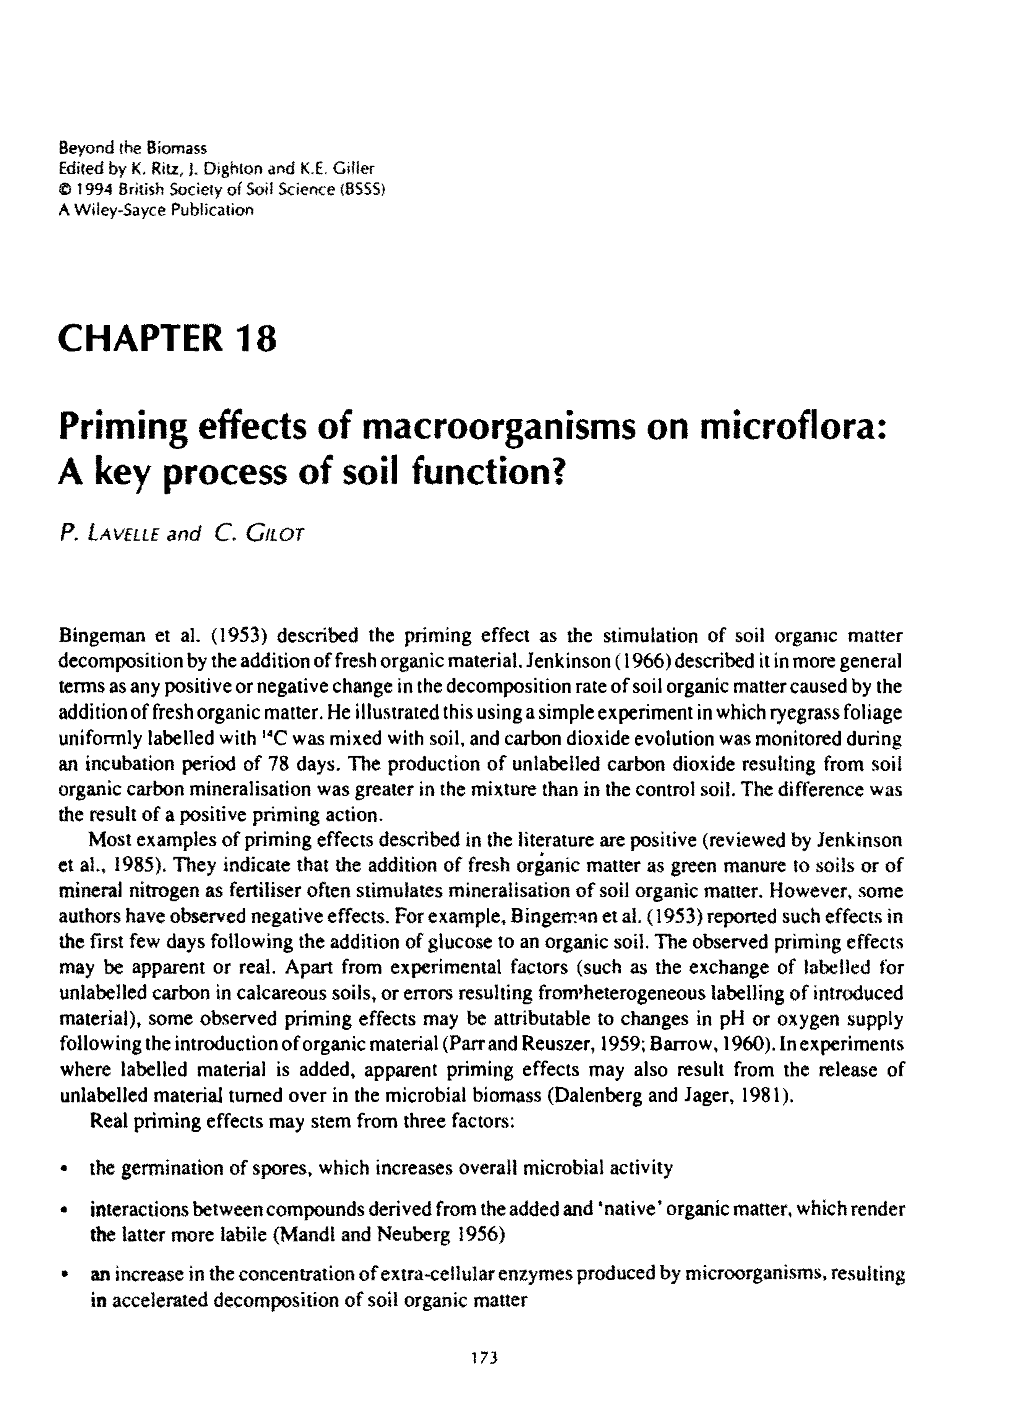 Priming Effects of Macroorganisms on Microflora: a Key Process of Soil Function?